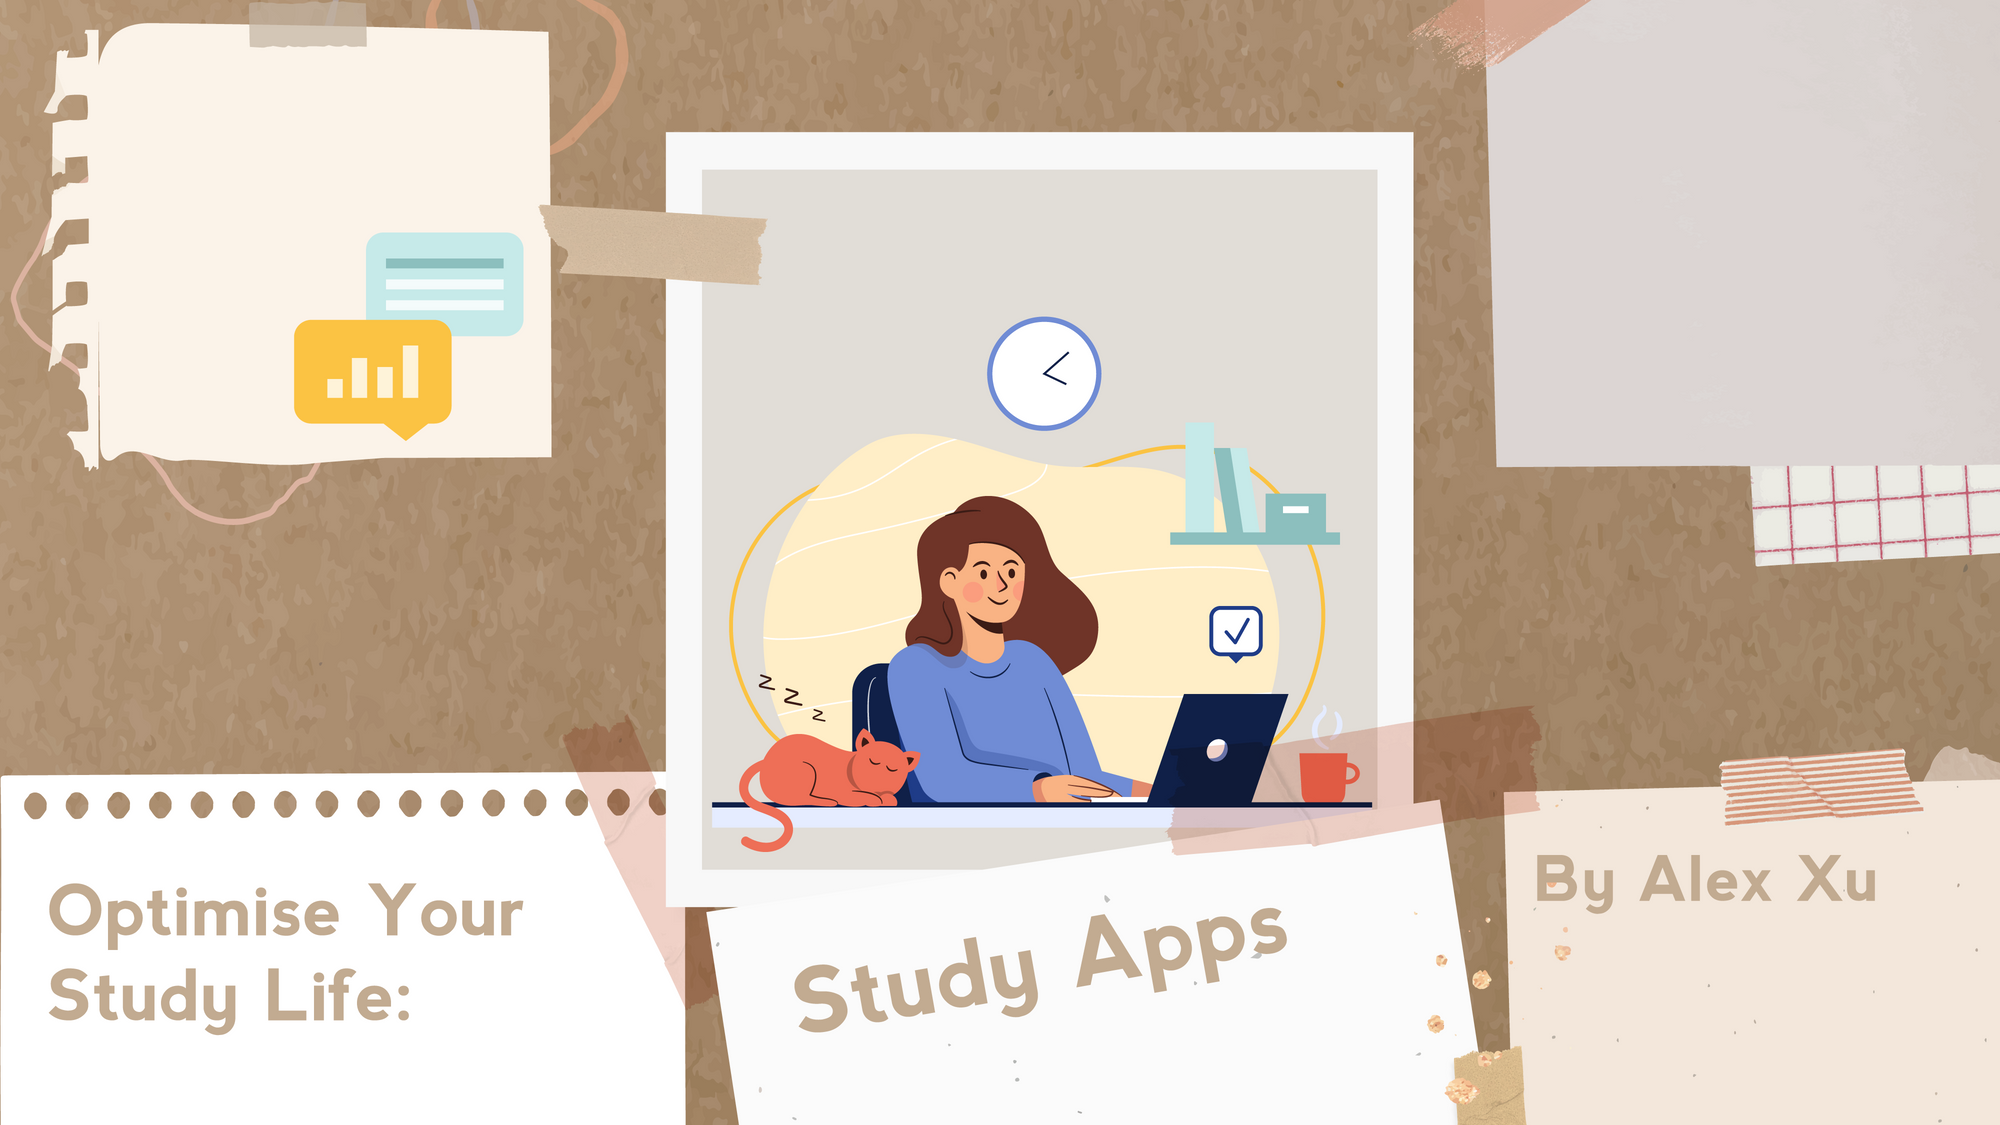 Optimise Your Study Life: Study Apps